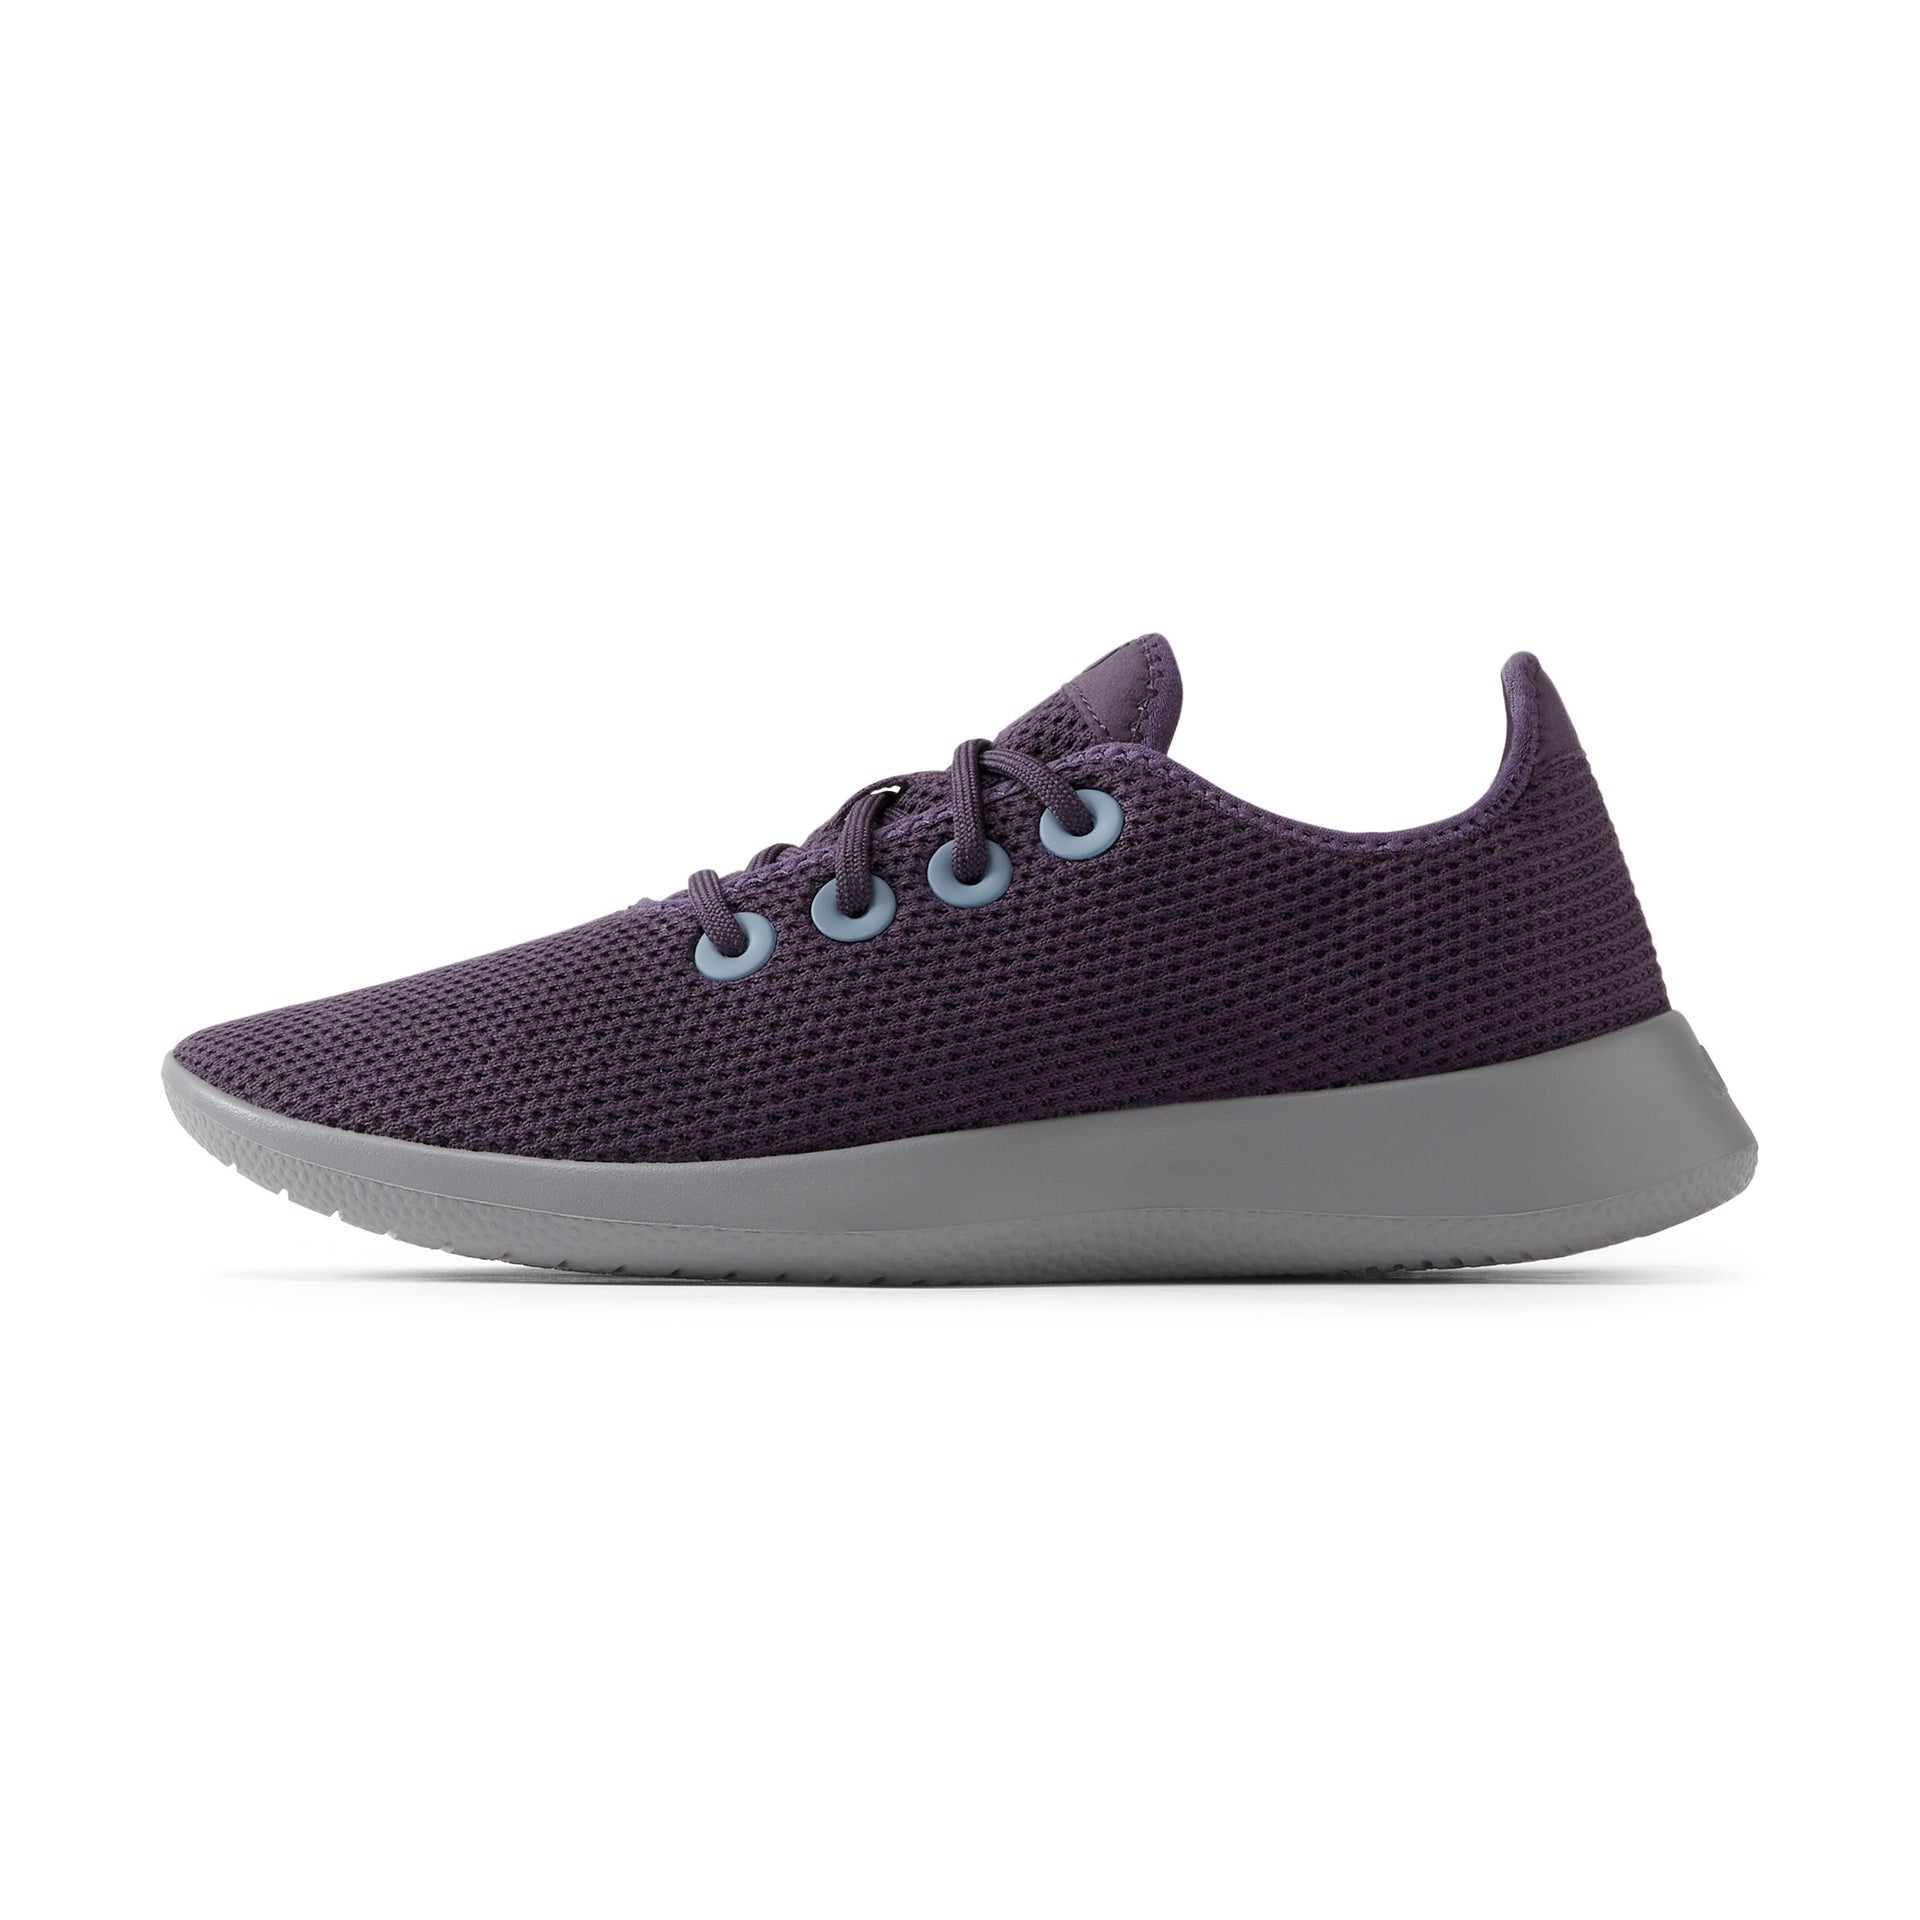 Tree Runners pour hommes - Thunder Purple (Mdm Gry)